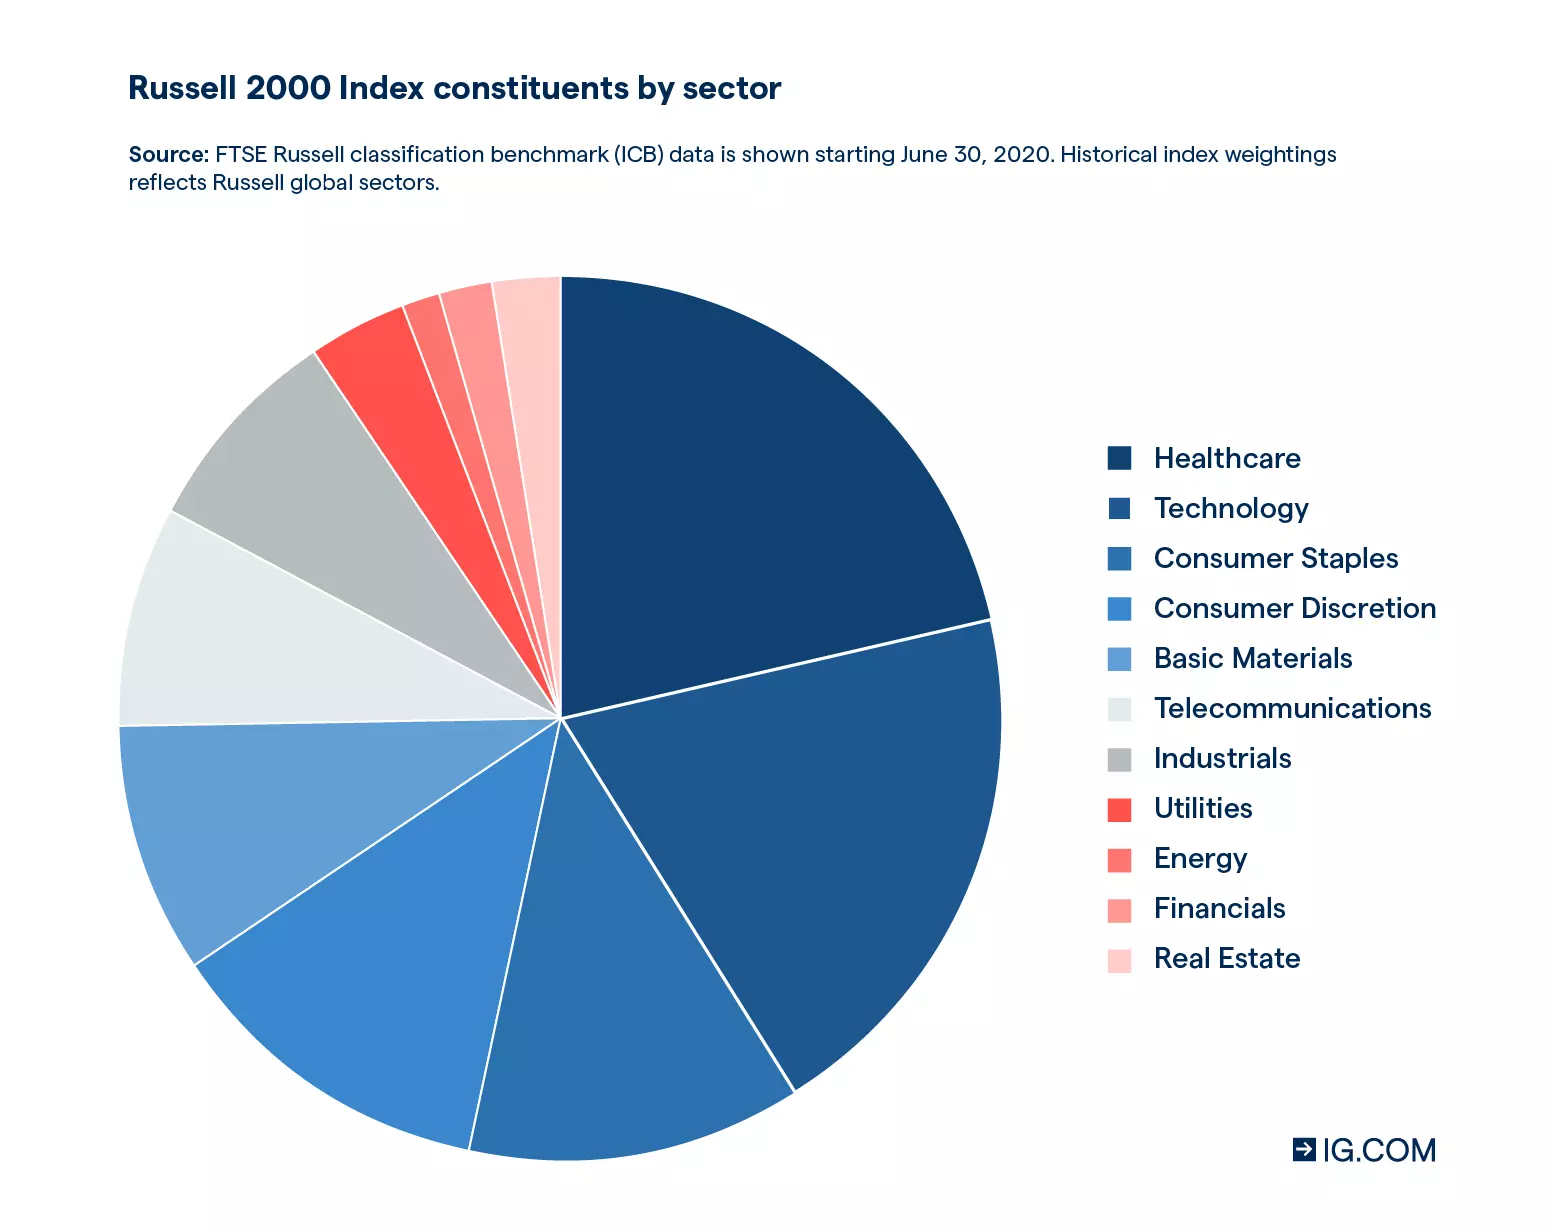 Pie chart image of Russell 2000 Index’s constituent sectors by order of weighting as of June 2020.